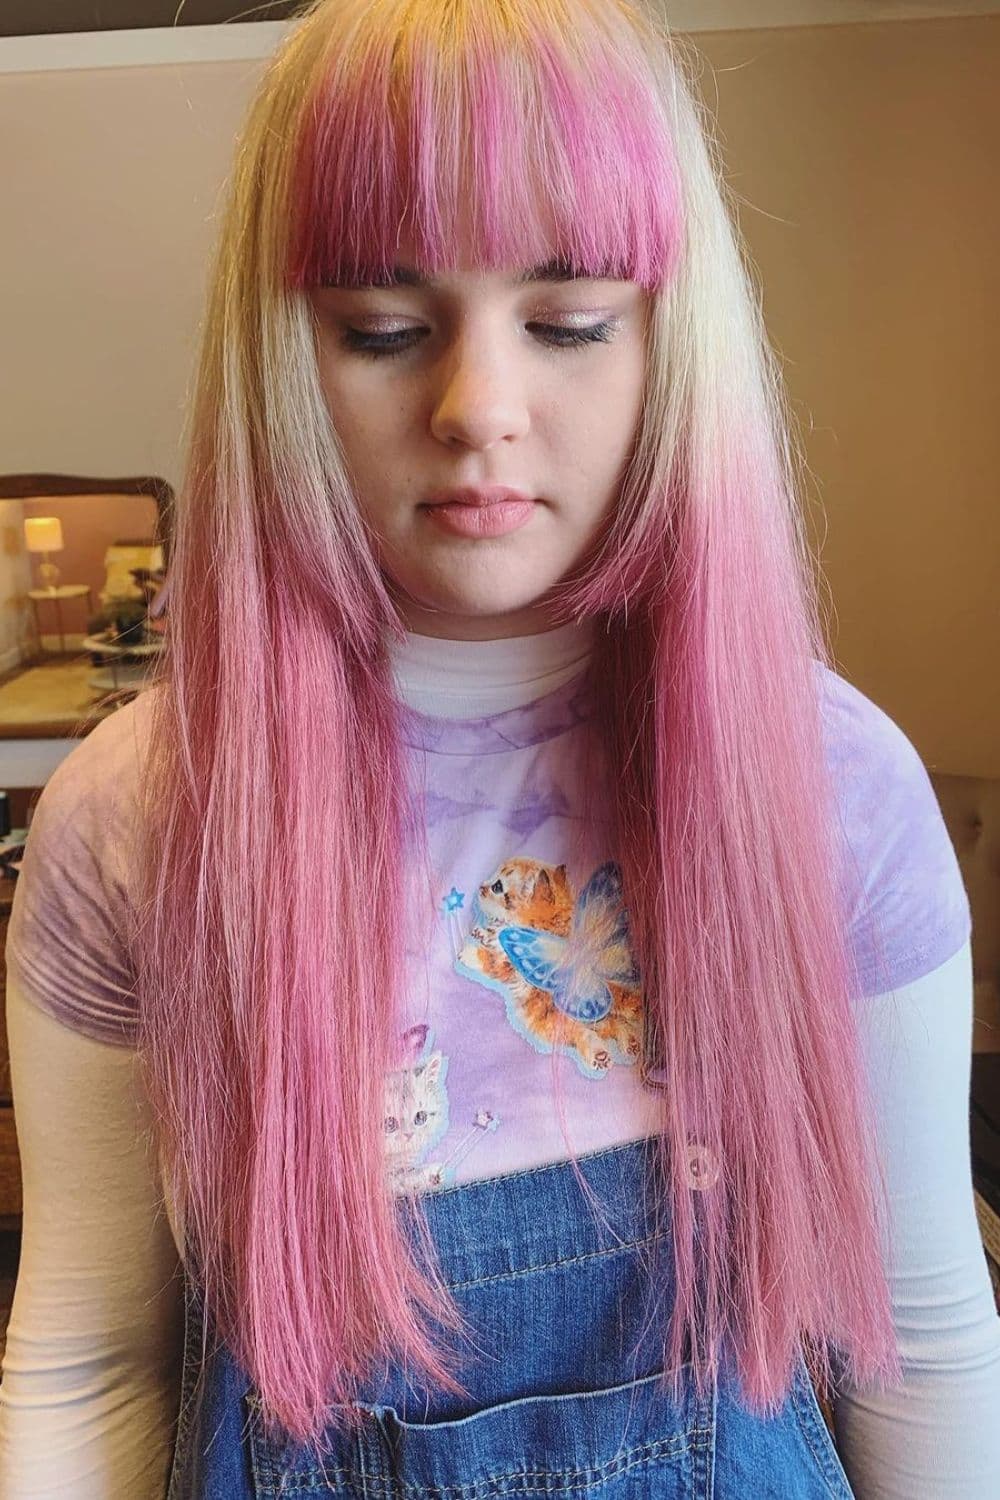 A woman with long blonde and pink hair and medium-length blunt bangs.